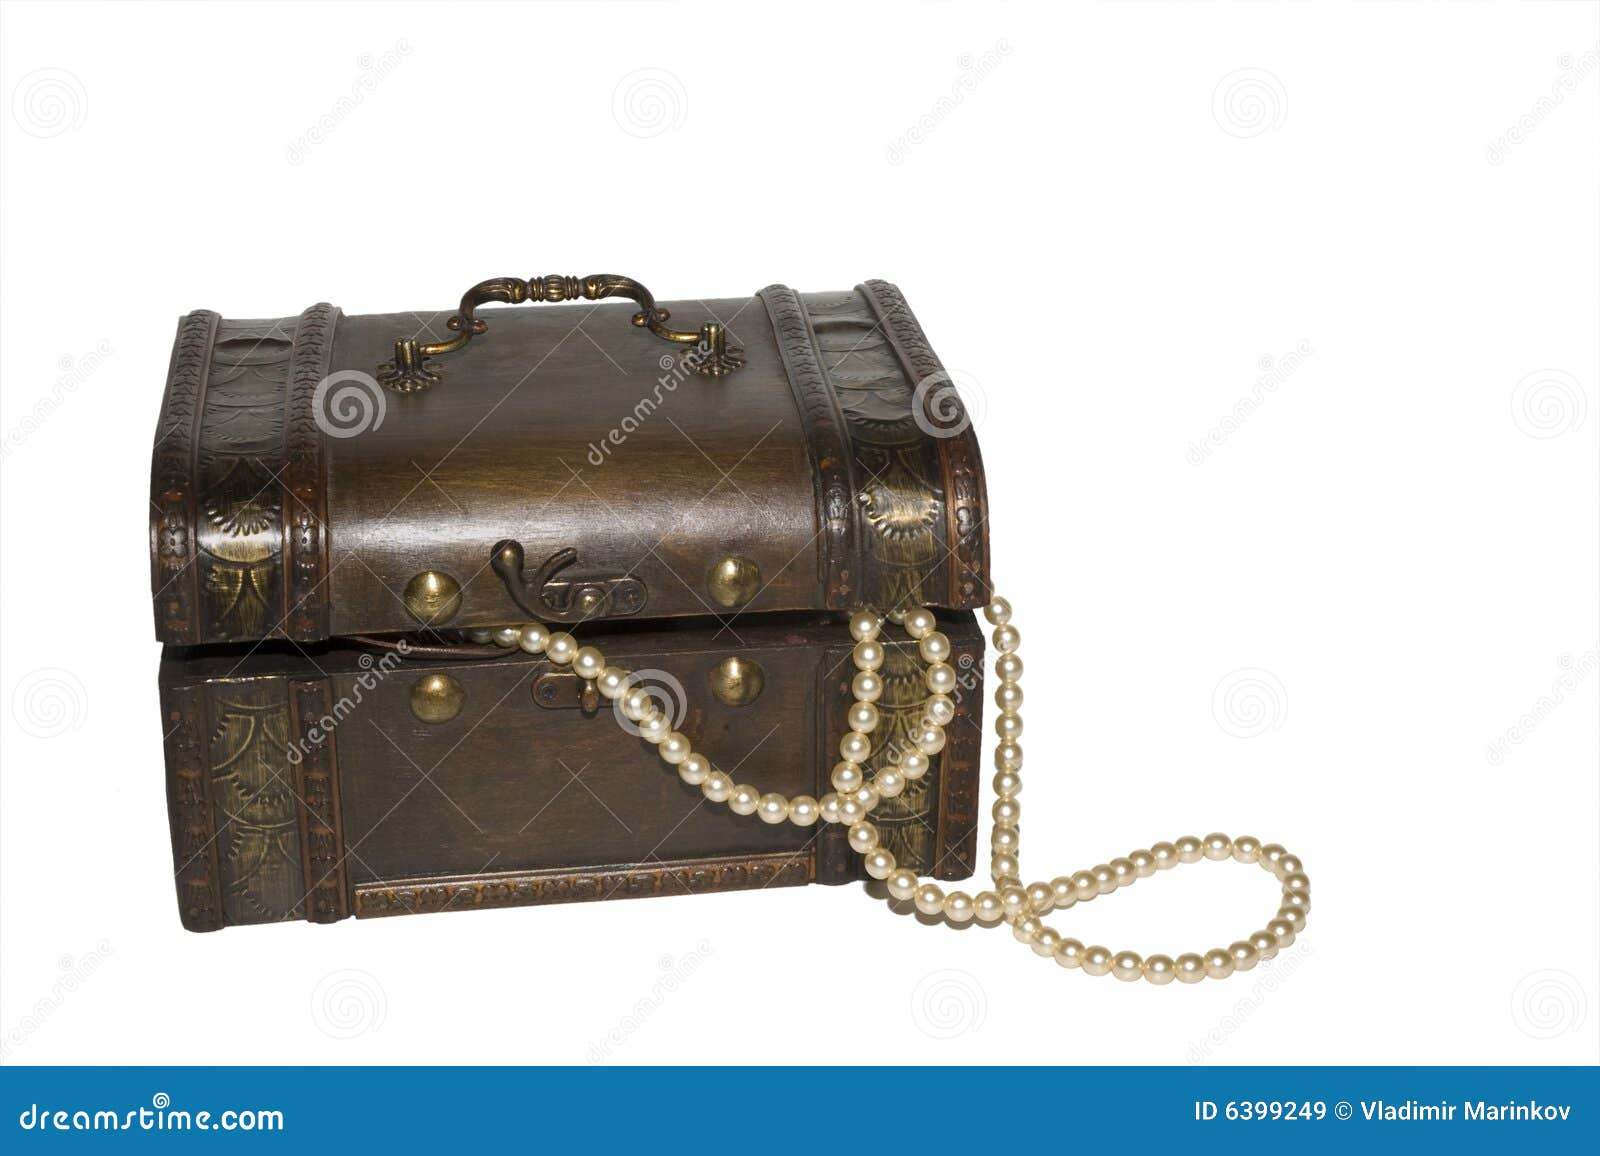 Treasure Chest Royalty Free Stock Images - Image: 6399249